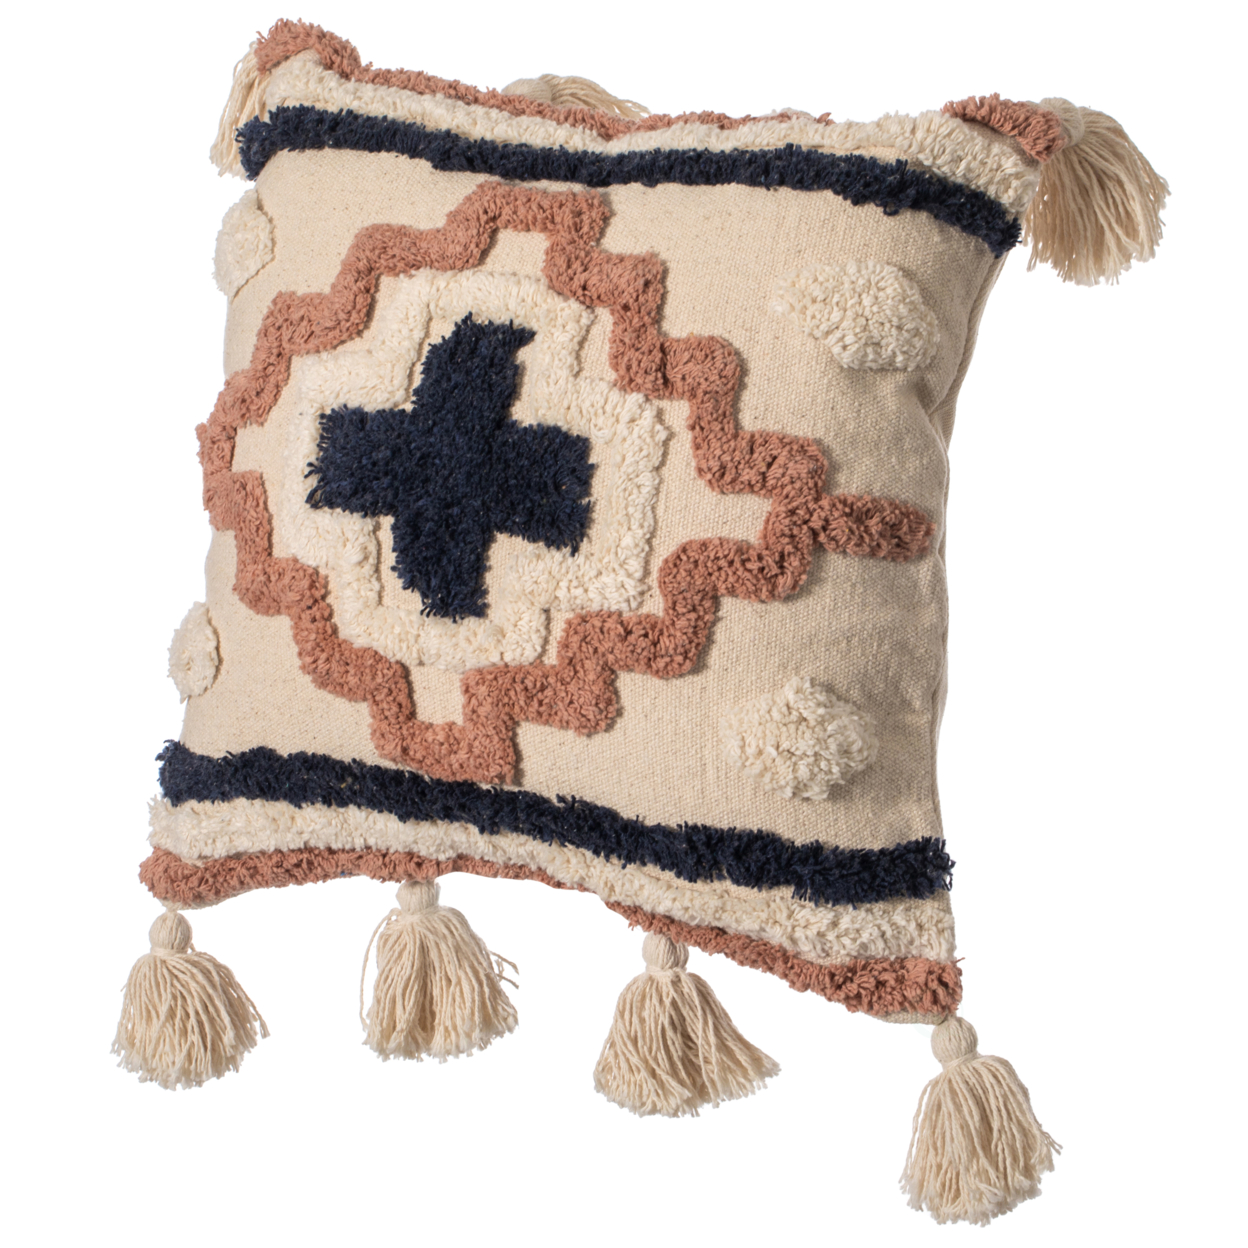 16 Handwoven Cotton Throw Pillow Cover With Tufted Designs And Side Tassels - Geometric With Cushion